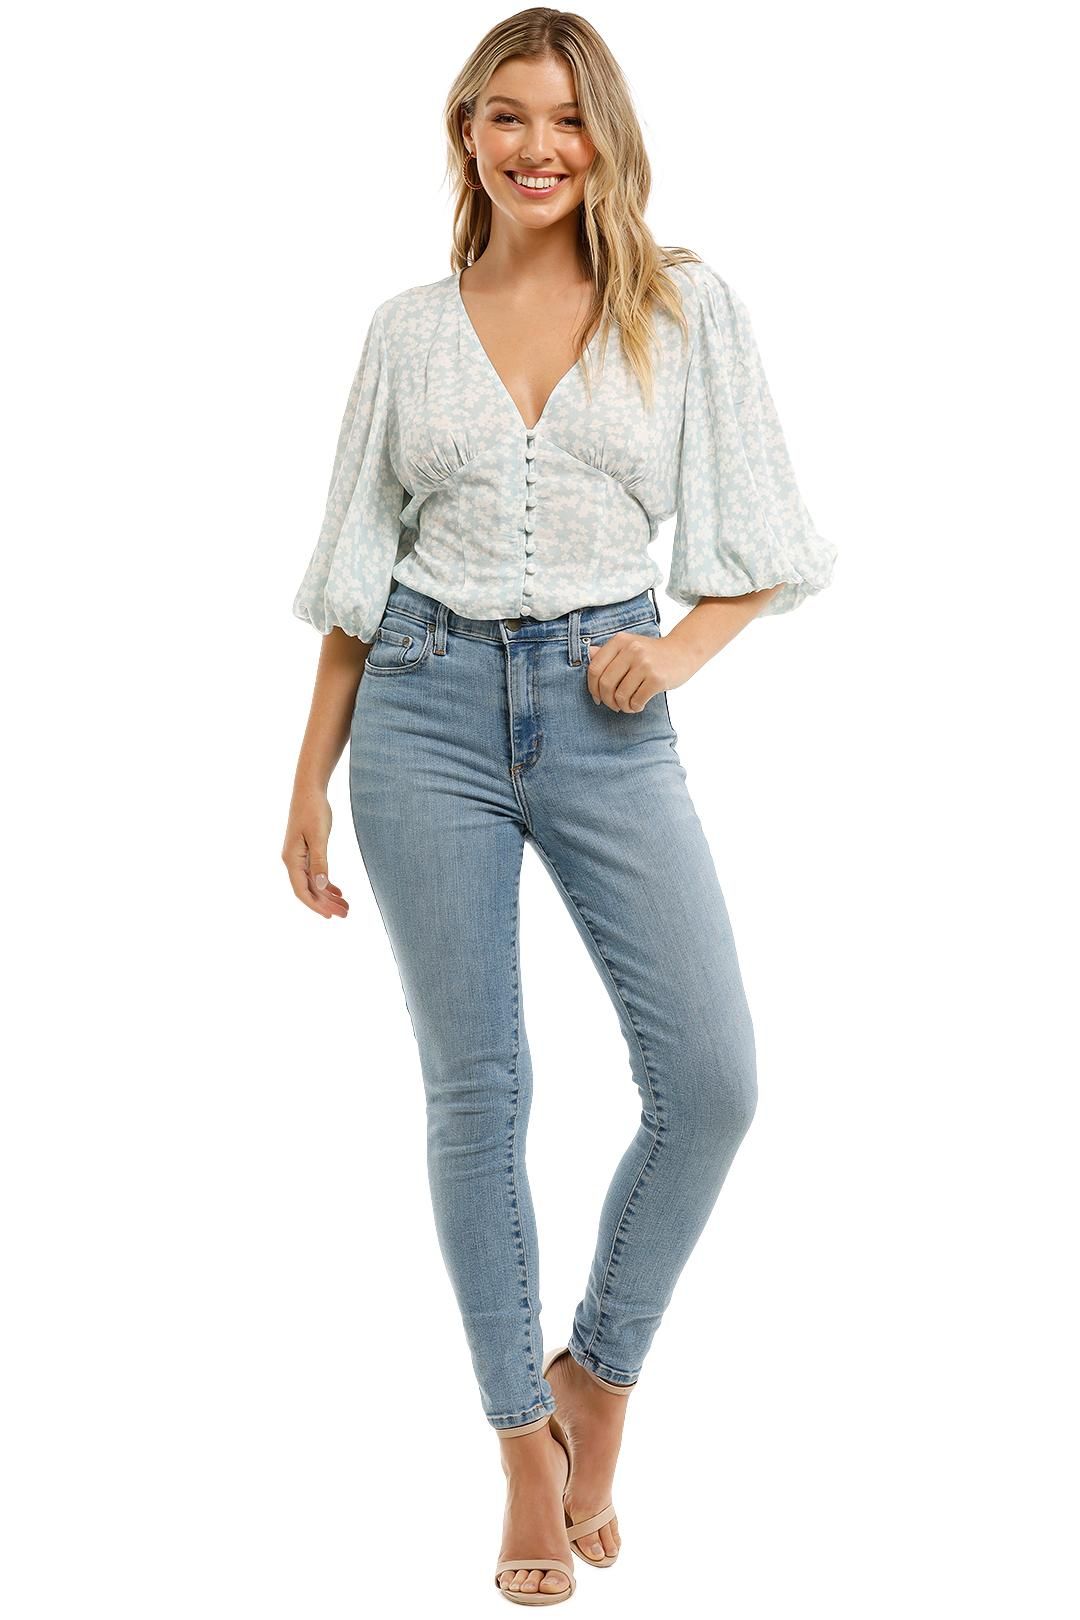 Charlie Holiday Cali Blouse Bloom